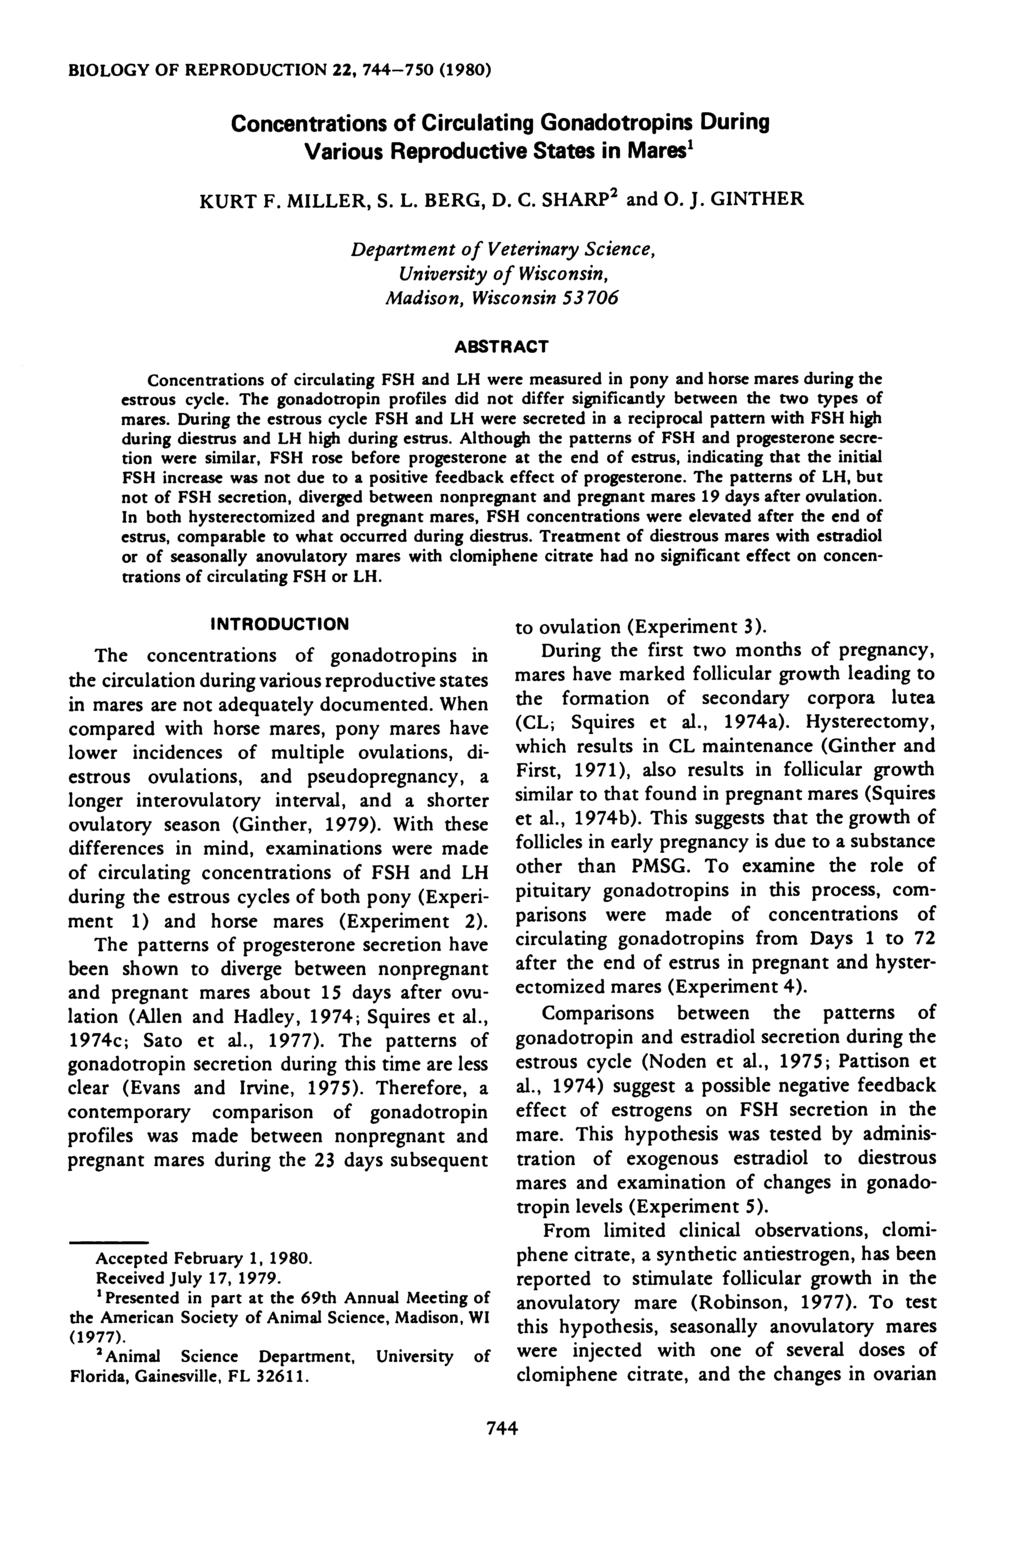 BIOLOGY OF REPRODUCTION, 744-75 (19) Concentrations of Circulating Gonadotropins During Various Reproductive States in Mares KURT F. MILLER, S. L. BERG, D. C. SHARP and. J.